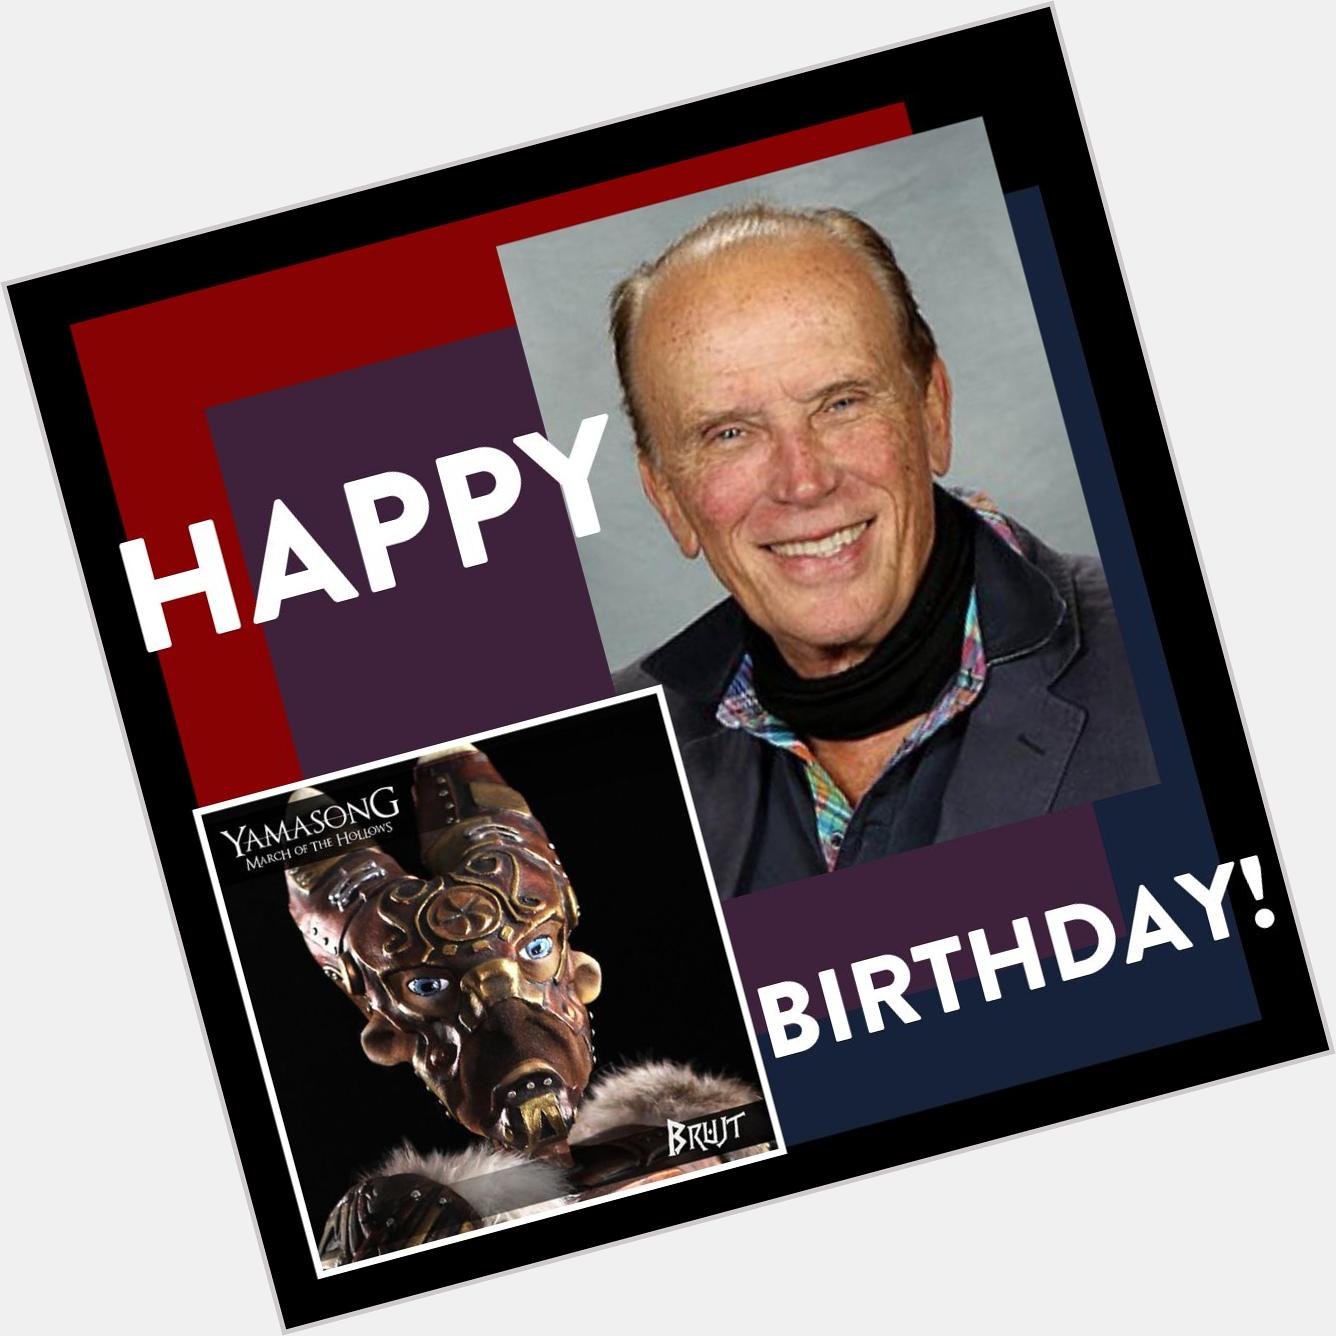 Everyone at Dark Dunes wishes Peter Weller (the voice of Brujt in a very Happy Birthday! 